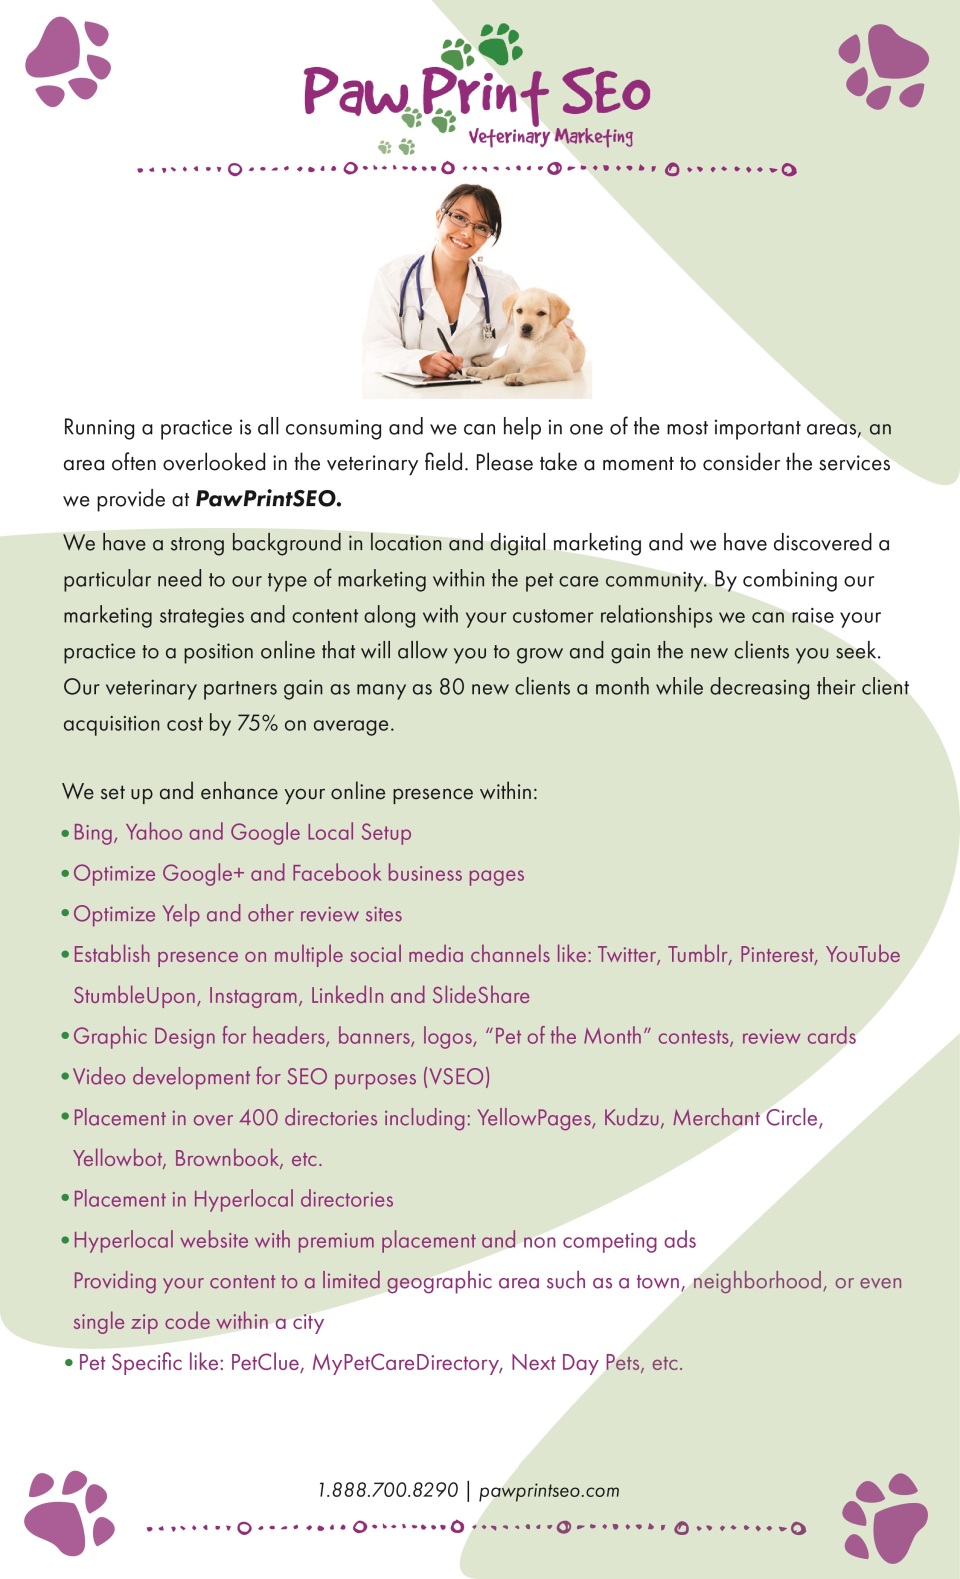 For as low as $250 a month PawPrintSEO will give you digital marketing done right with results!